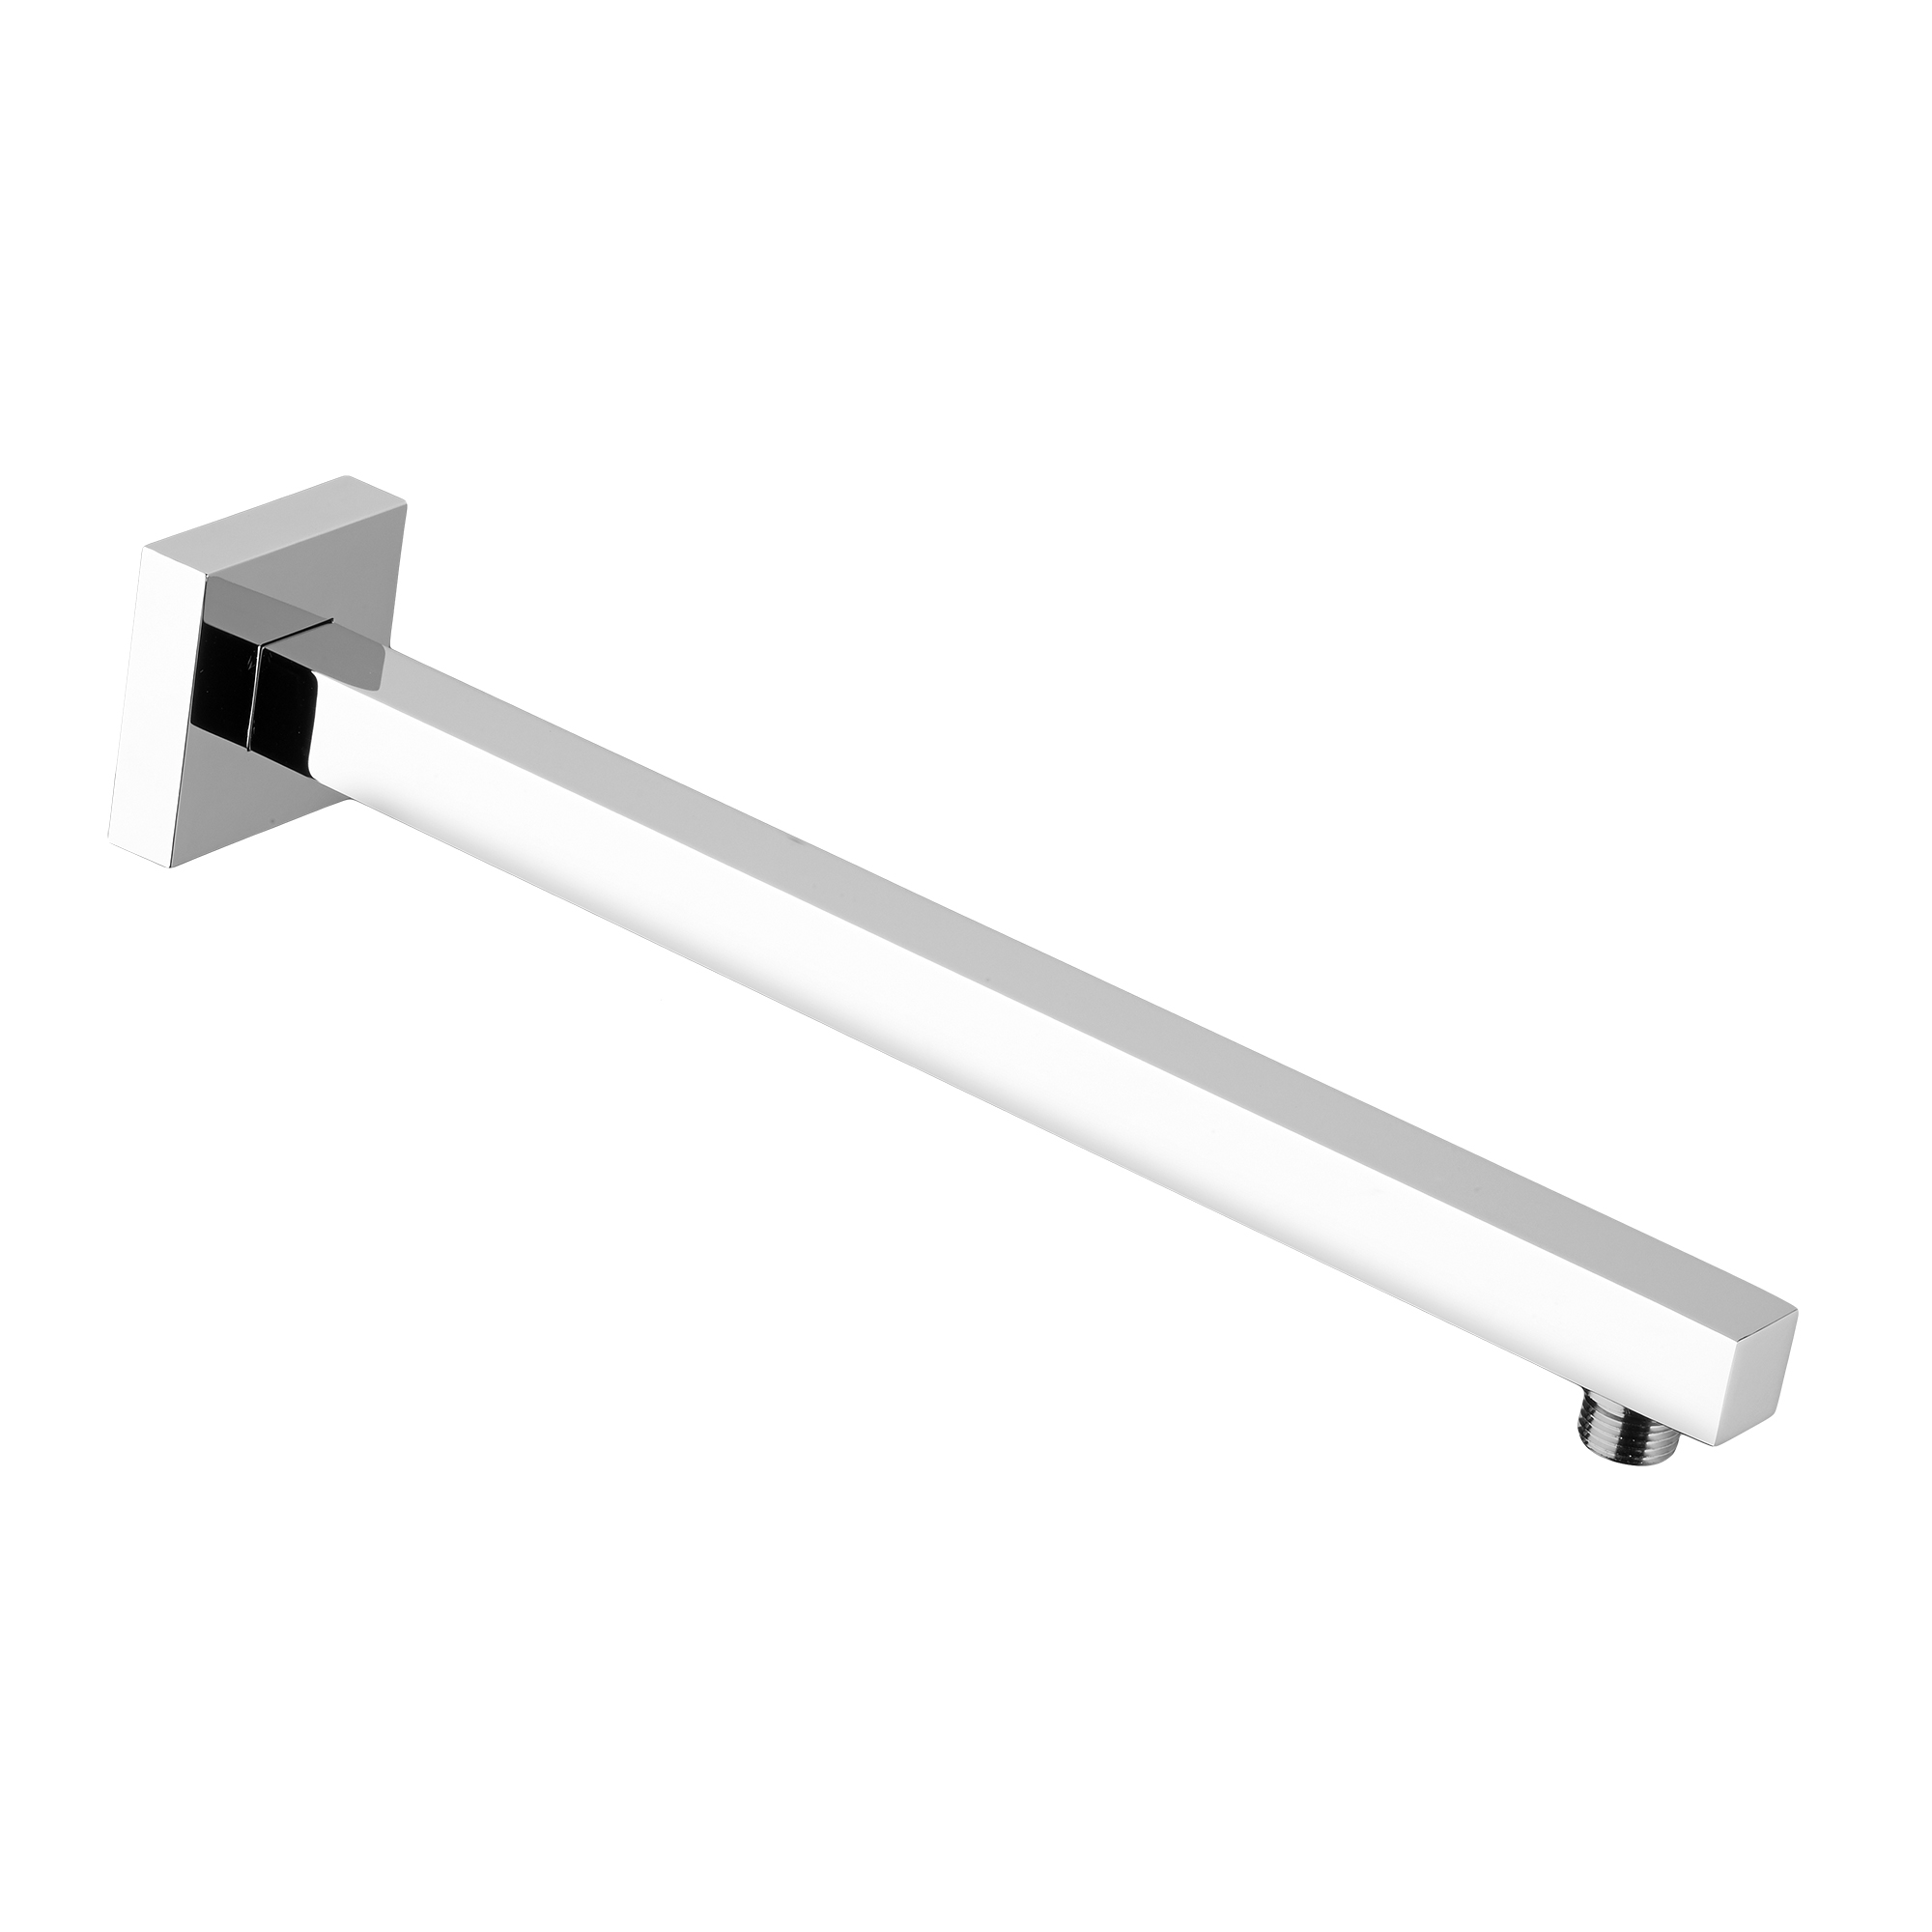 16 in. Square Shower Arm